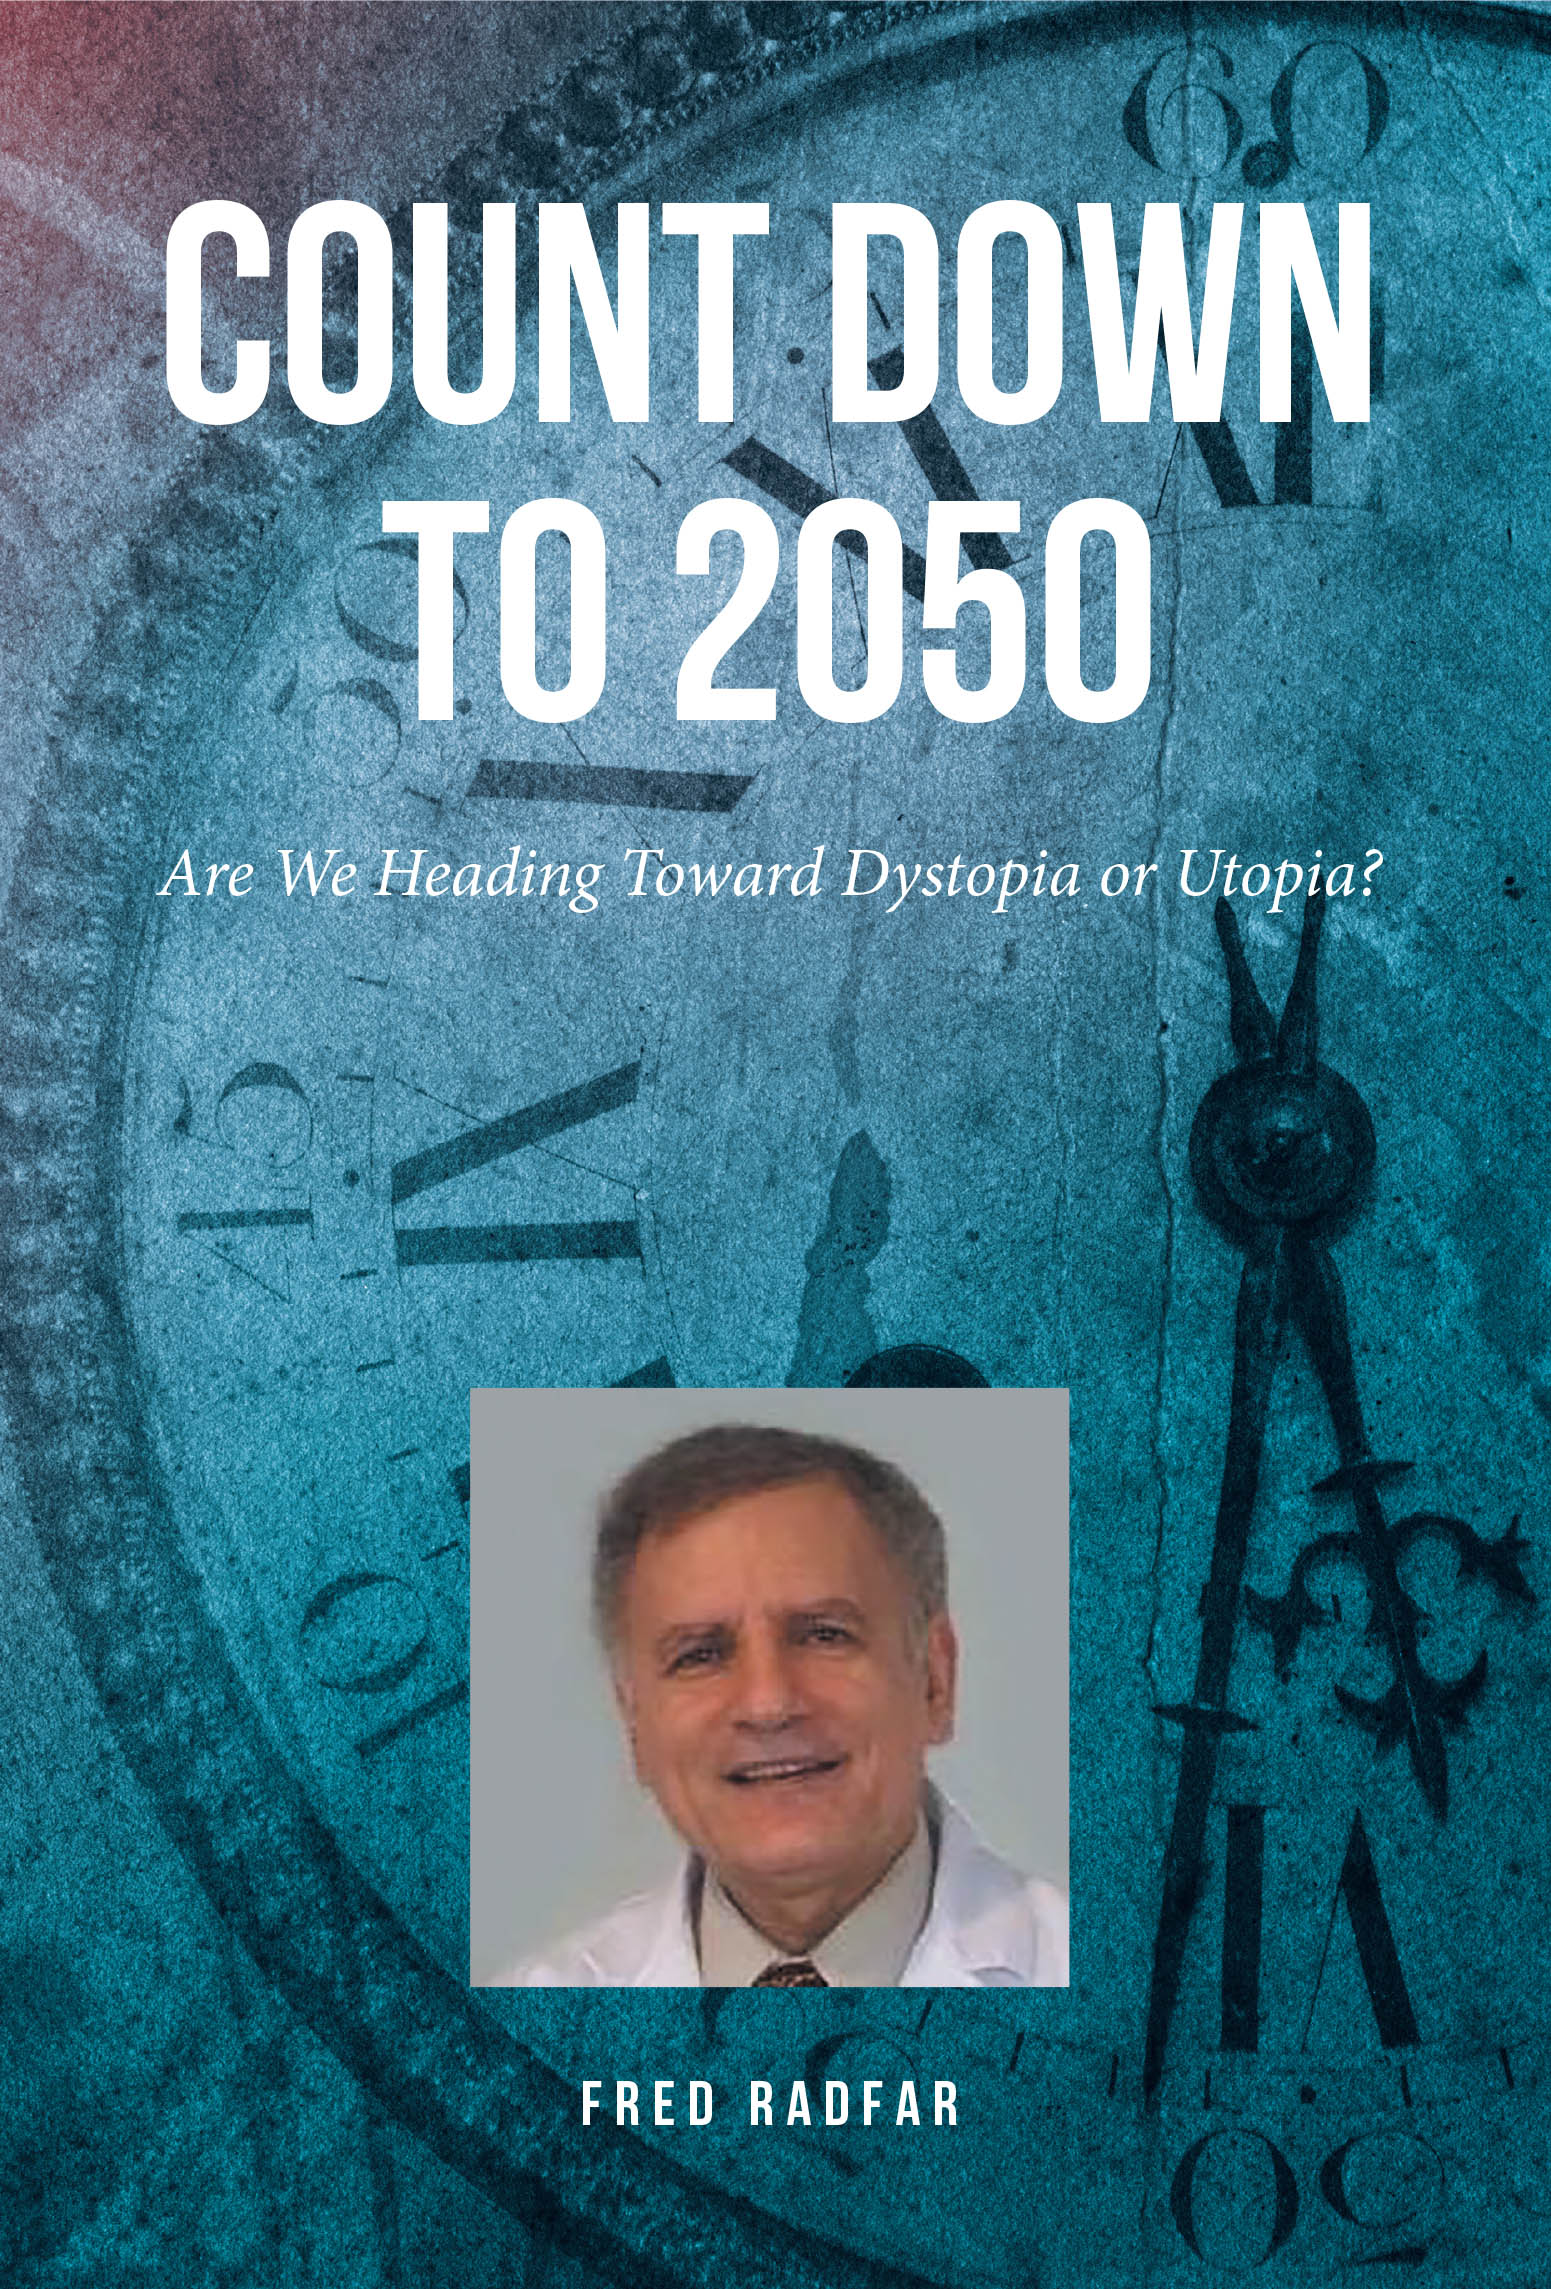 Fred Radfar’s New Book, “Count Down to 2050: Are We Heading Toward Dystopia or Utopia?” Explores Questions Surrounding Humanity’s Future and a More Sustainable World